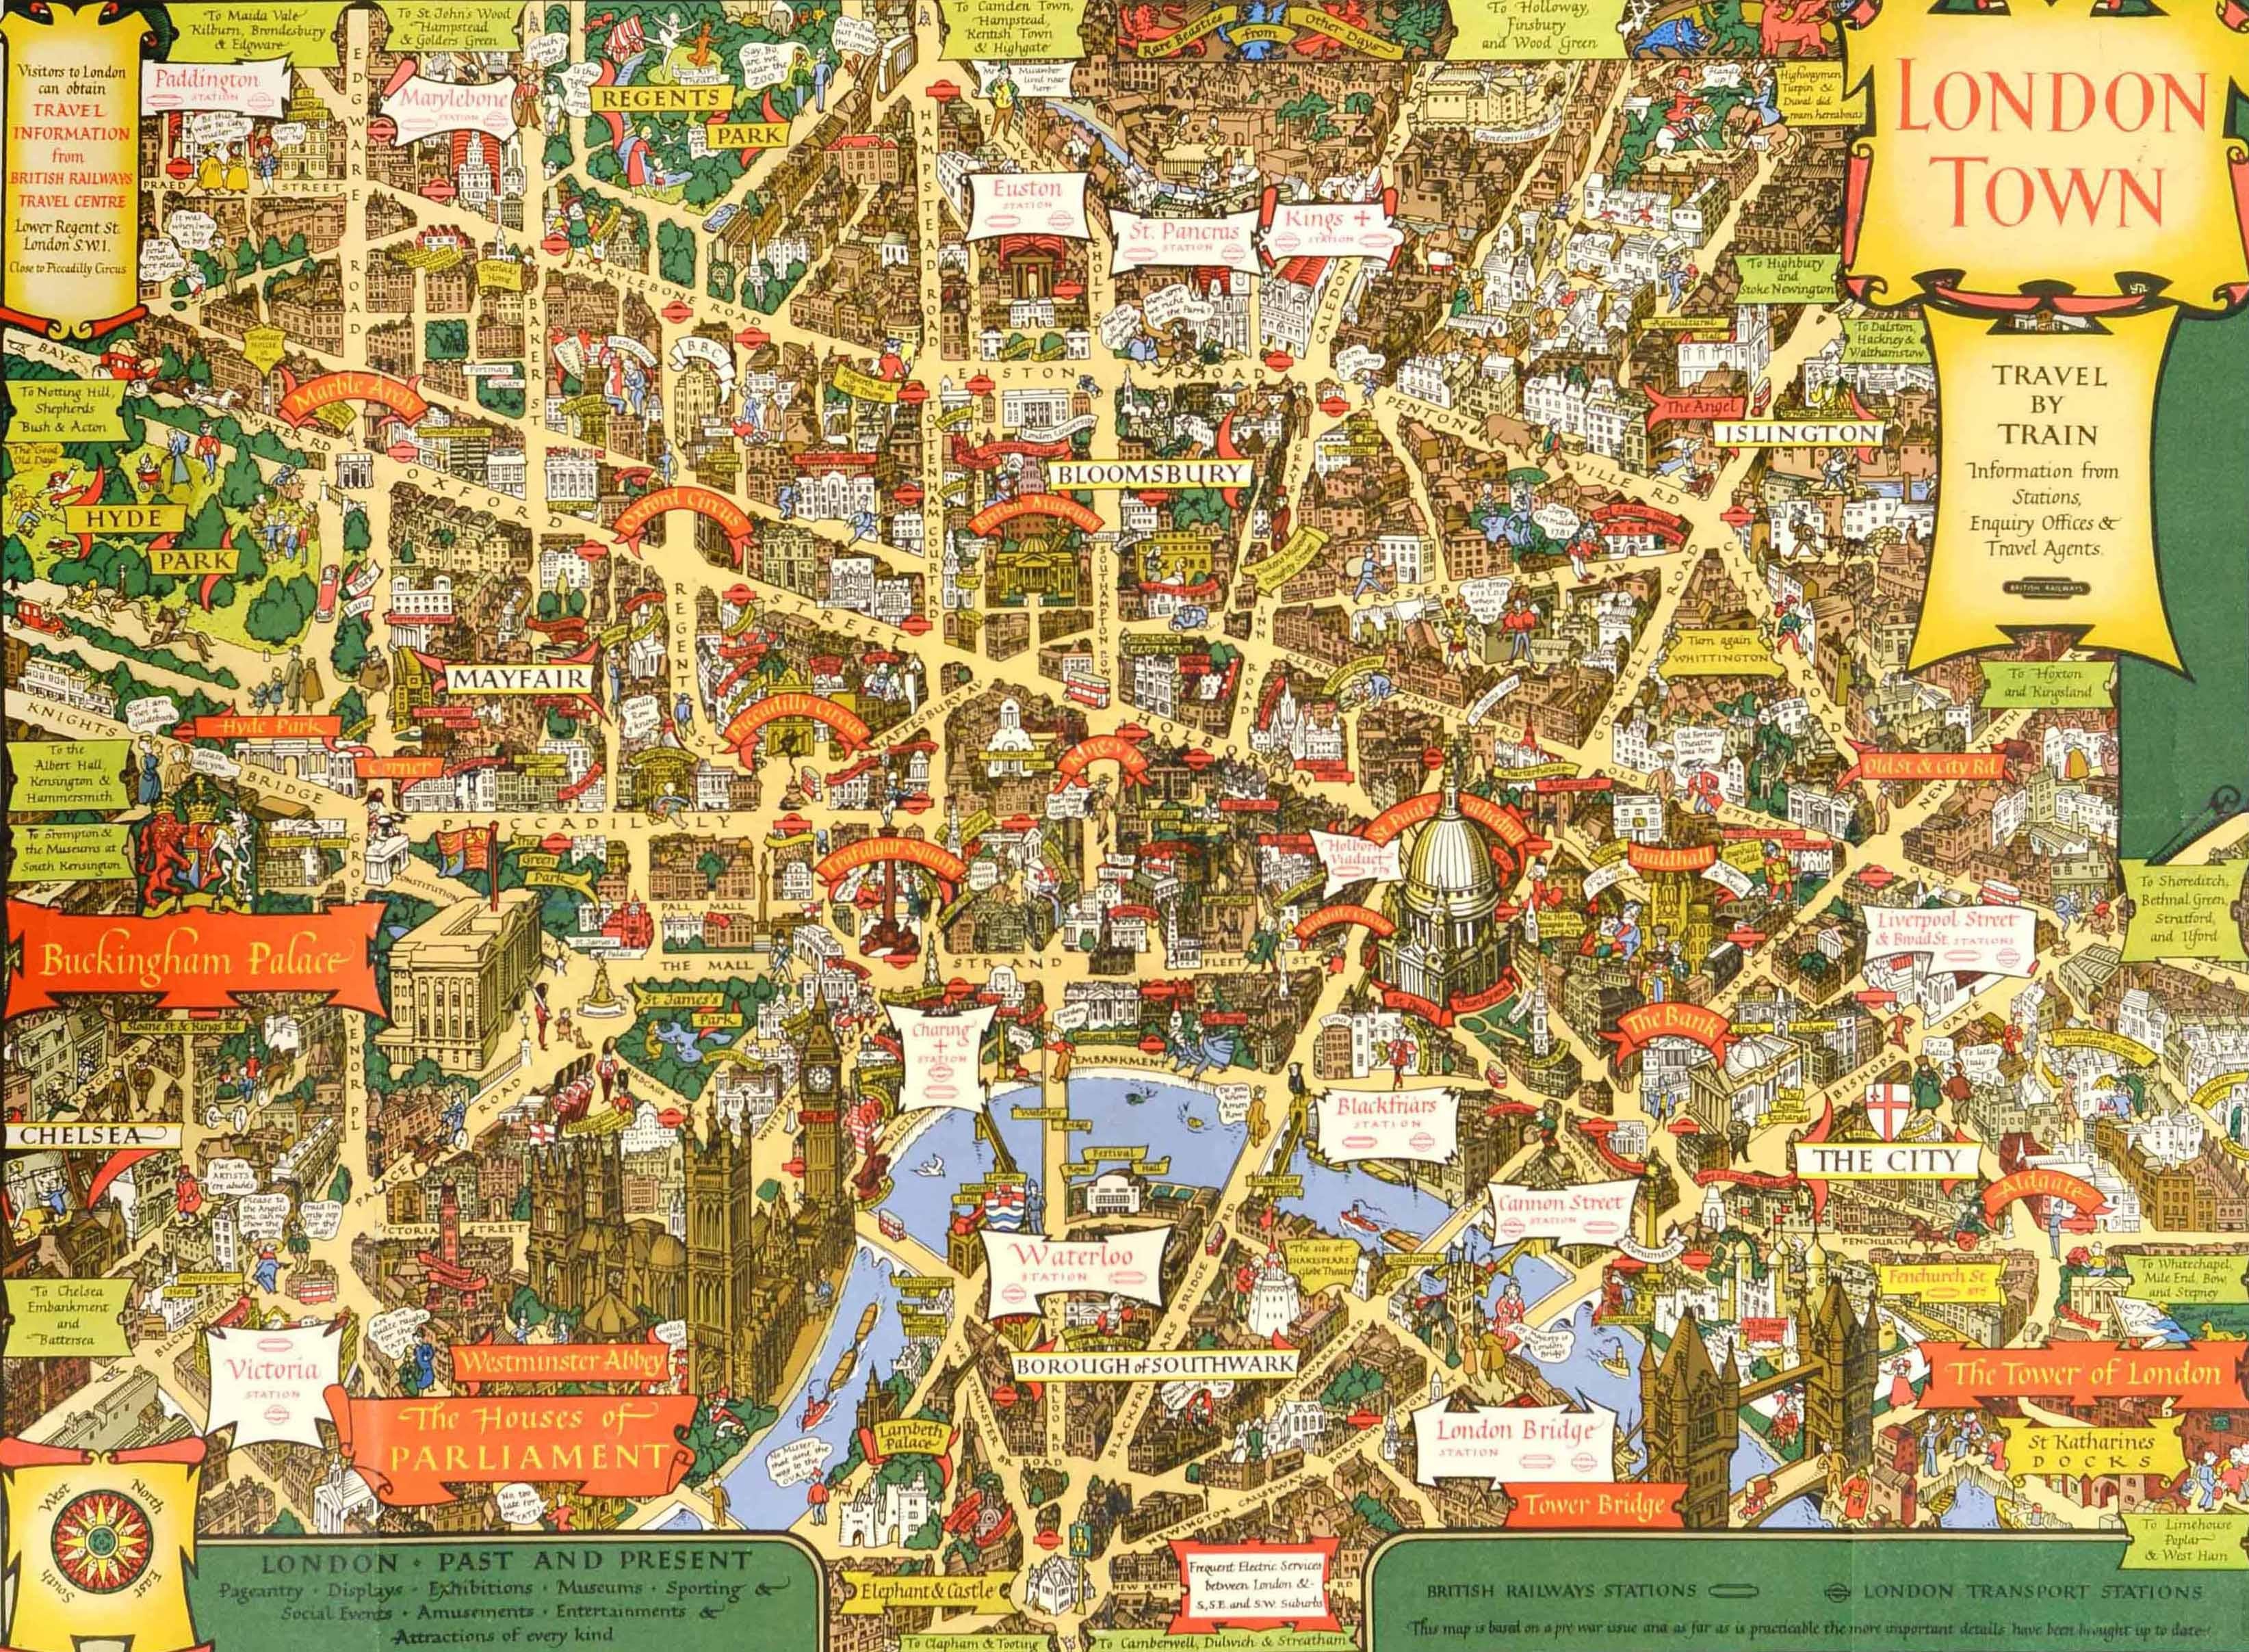 Original vintage Travel By Train map poster for London Town by the British artist, illustrator and poster designer Kerry Lee (1902-1988) featuring a detailed pictorial map of central London with captions including notable and historical buildings,